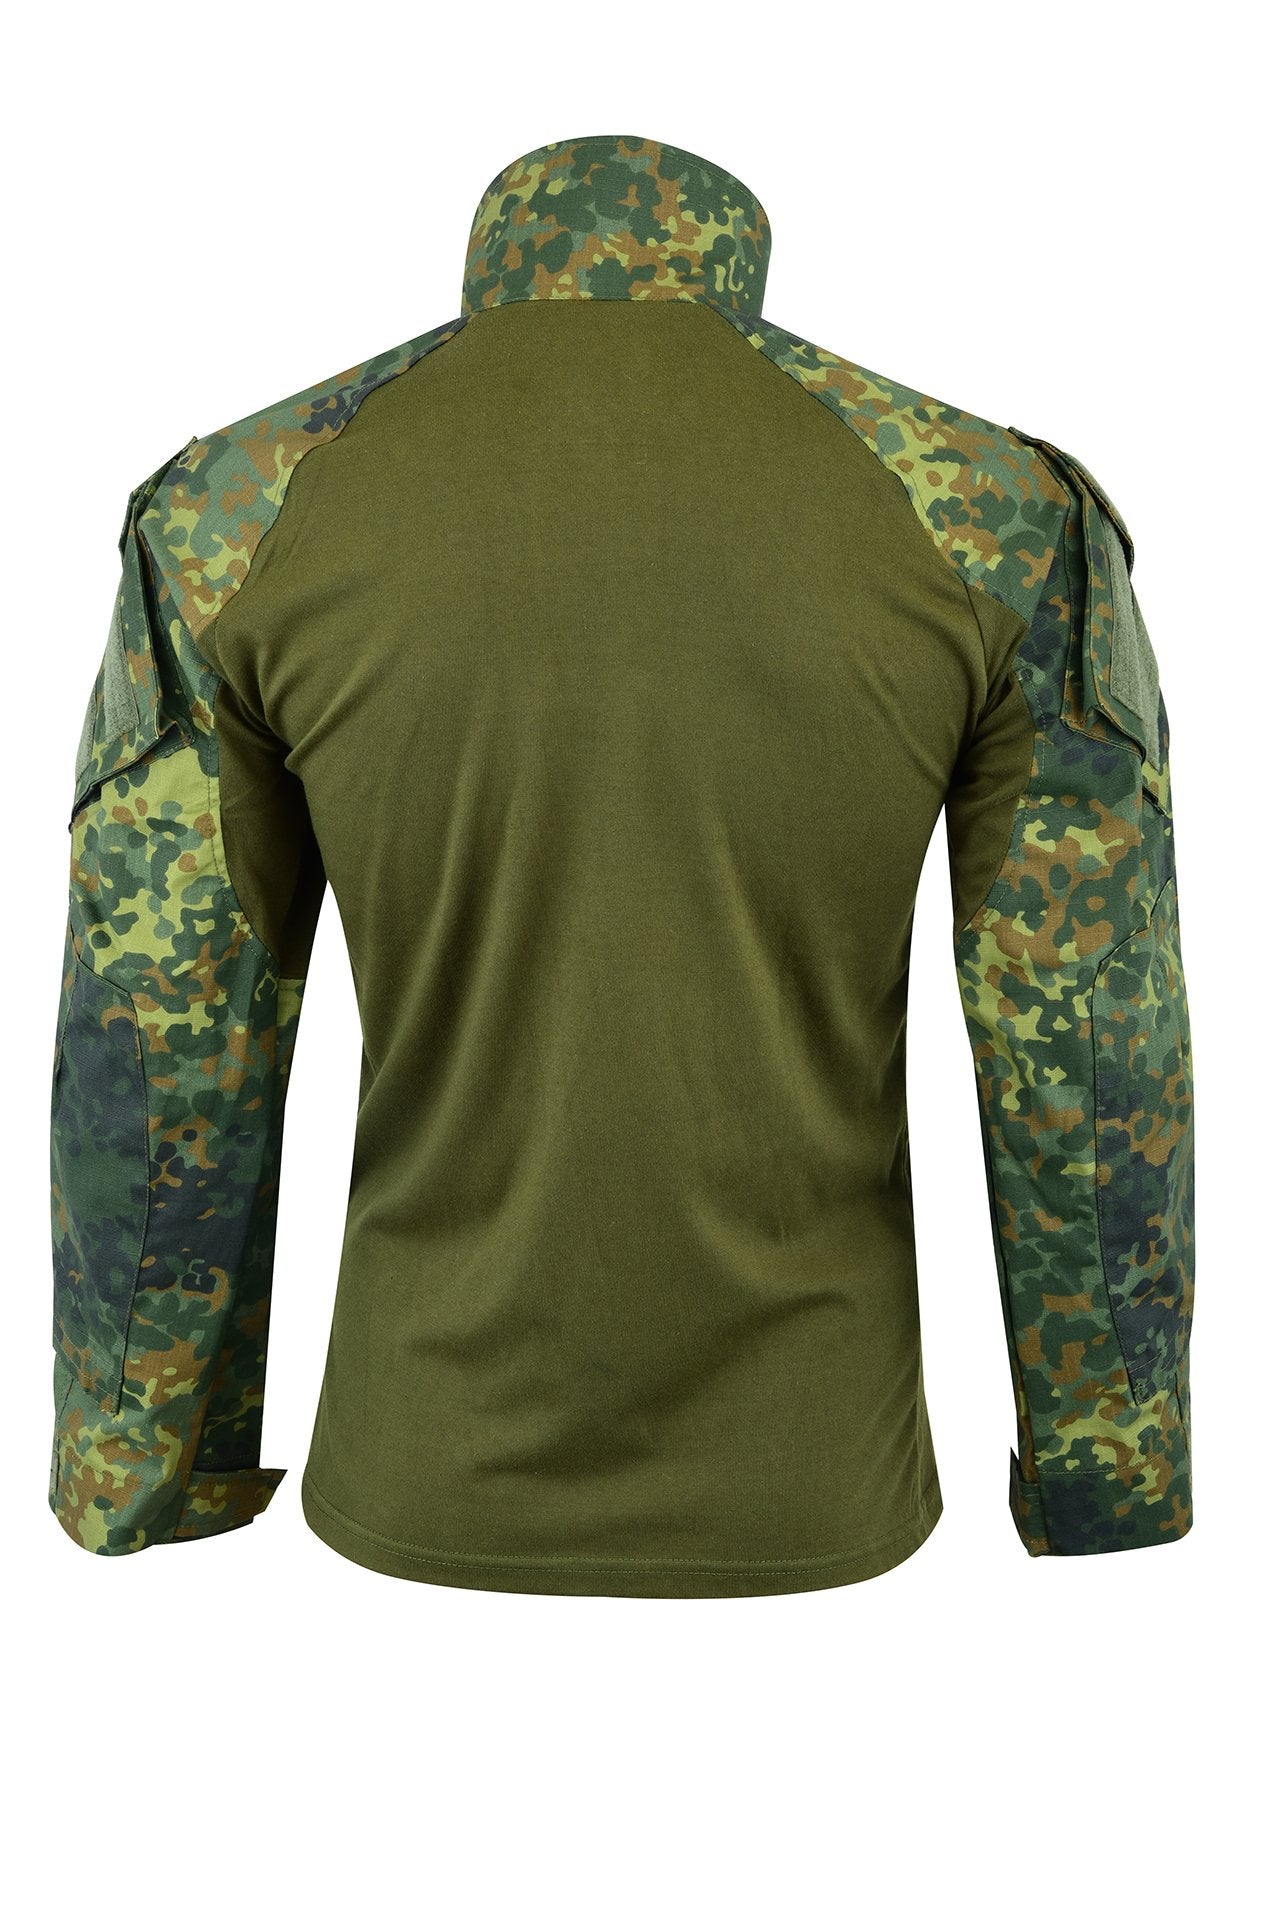 Tactical Zone HYBRID TACTICAL SHIRT IS A PERFECT COMBAT SHIRT Colour  German Flectarn backside